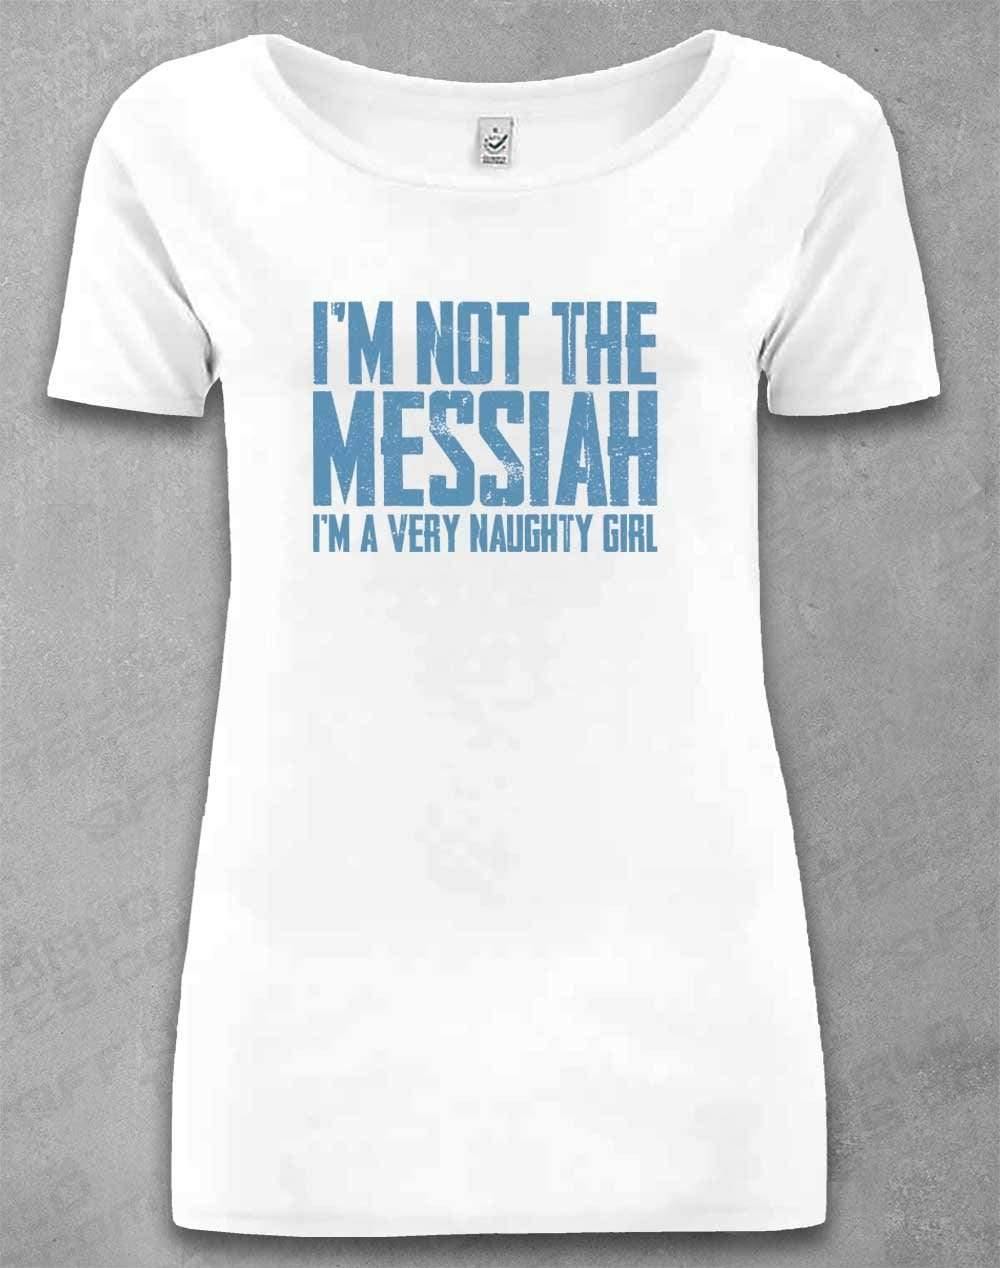 DELUXE I'm Not the Messiah I'm a Very Naughty Girl Organic Scoop Neck T-Shirt 8-10 / White  - Off World Tees